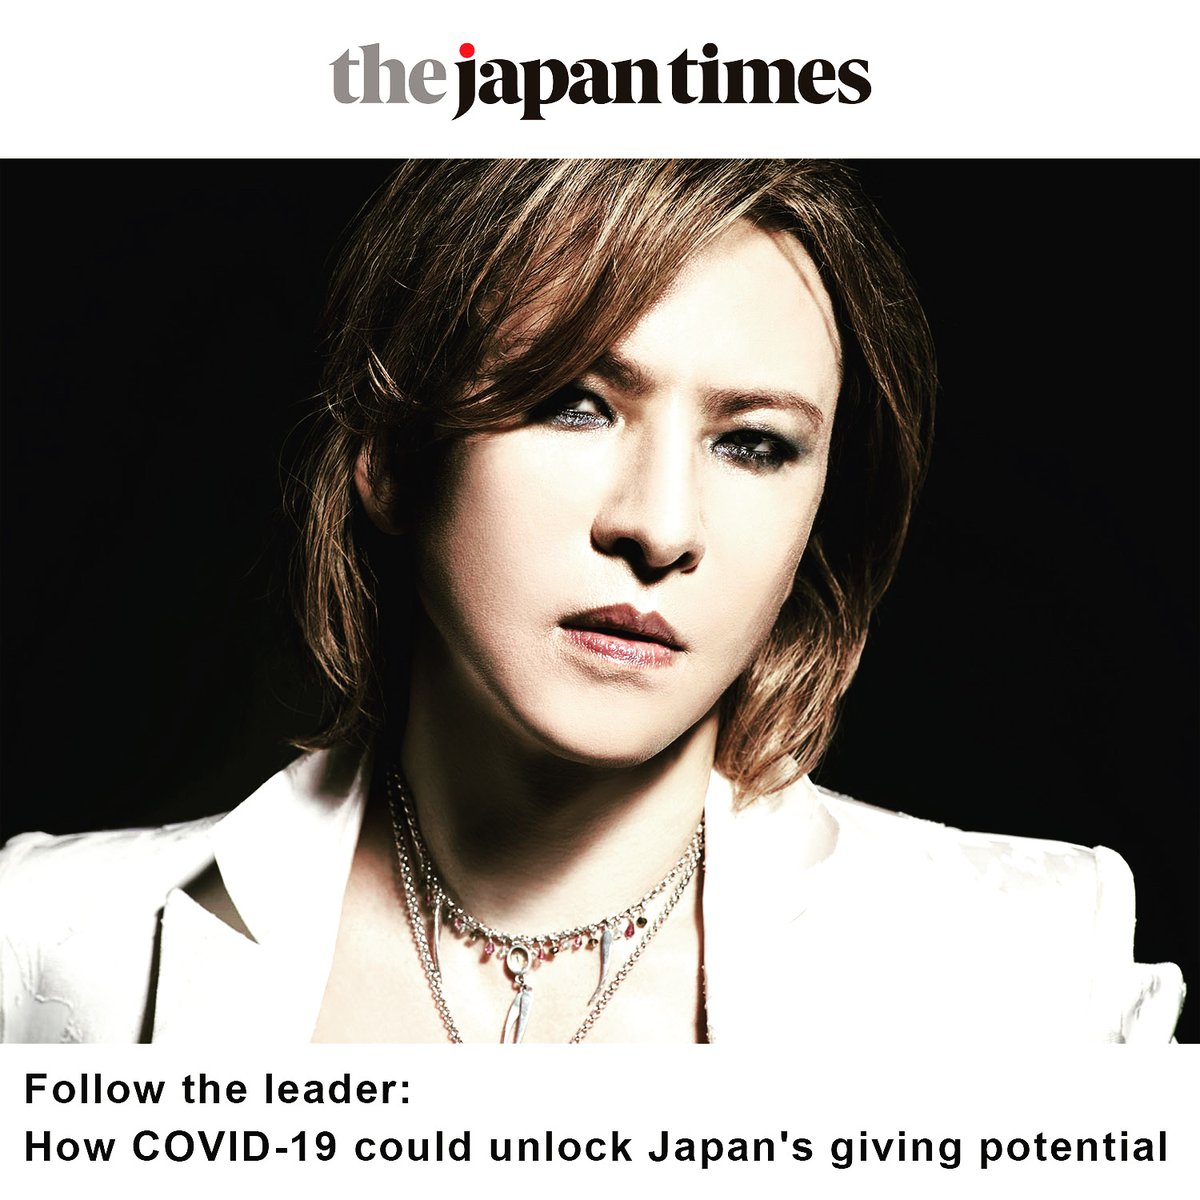 As long as we can save more people, I’ll be doing it.
一人でも多くの人が助かるように..  

@japantimes
“#Yoshiki,who recently donated ¥10 million to Japan’s National Center for Global Health and Medicine.. japantimes.co.jp/culture/2020/0…

#donation #healthcareworkers #covid19 #coronavirus